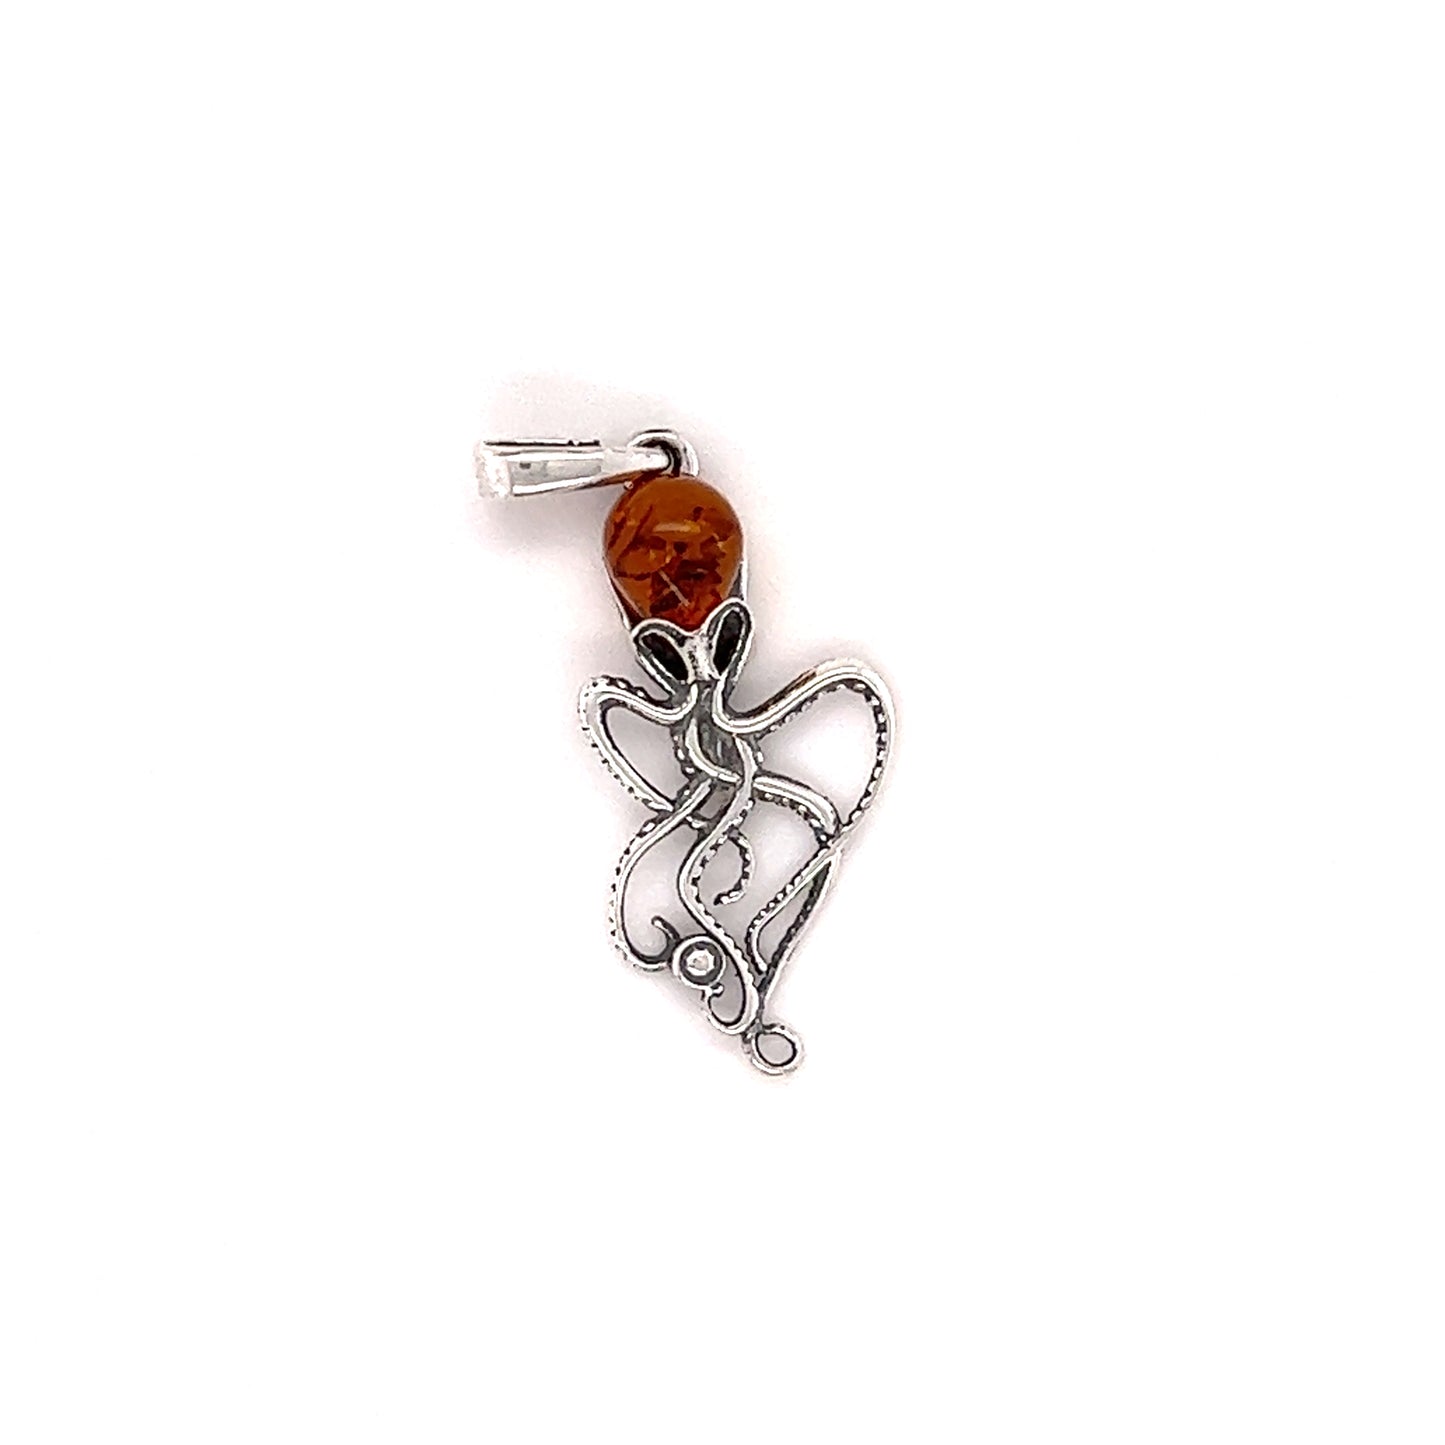 A Whimsical Amber Octopus Pendant with a silver bead on it, made by Super Silver.